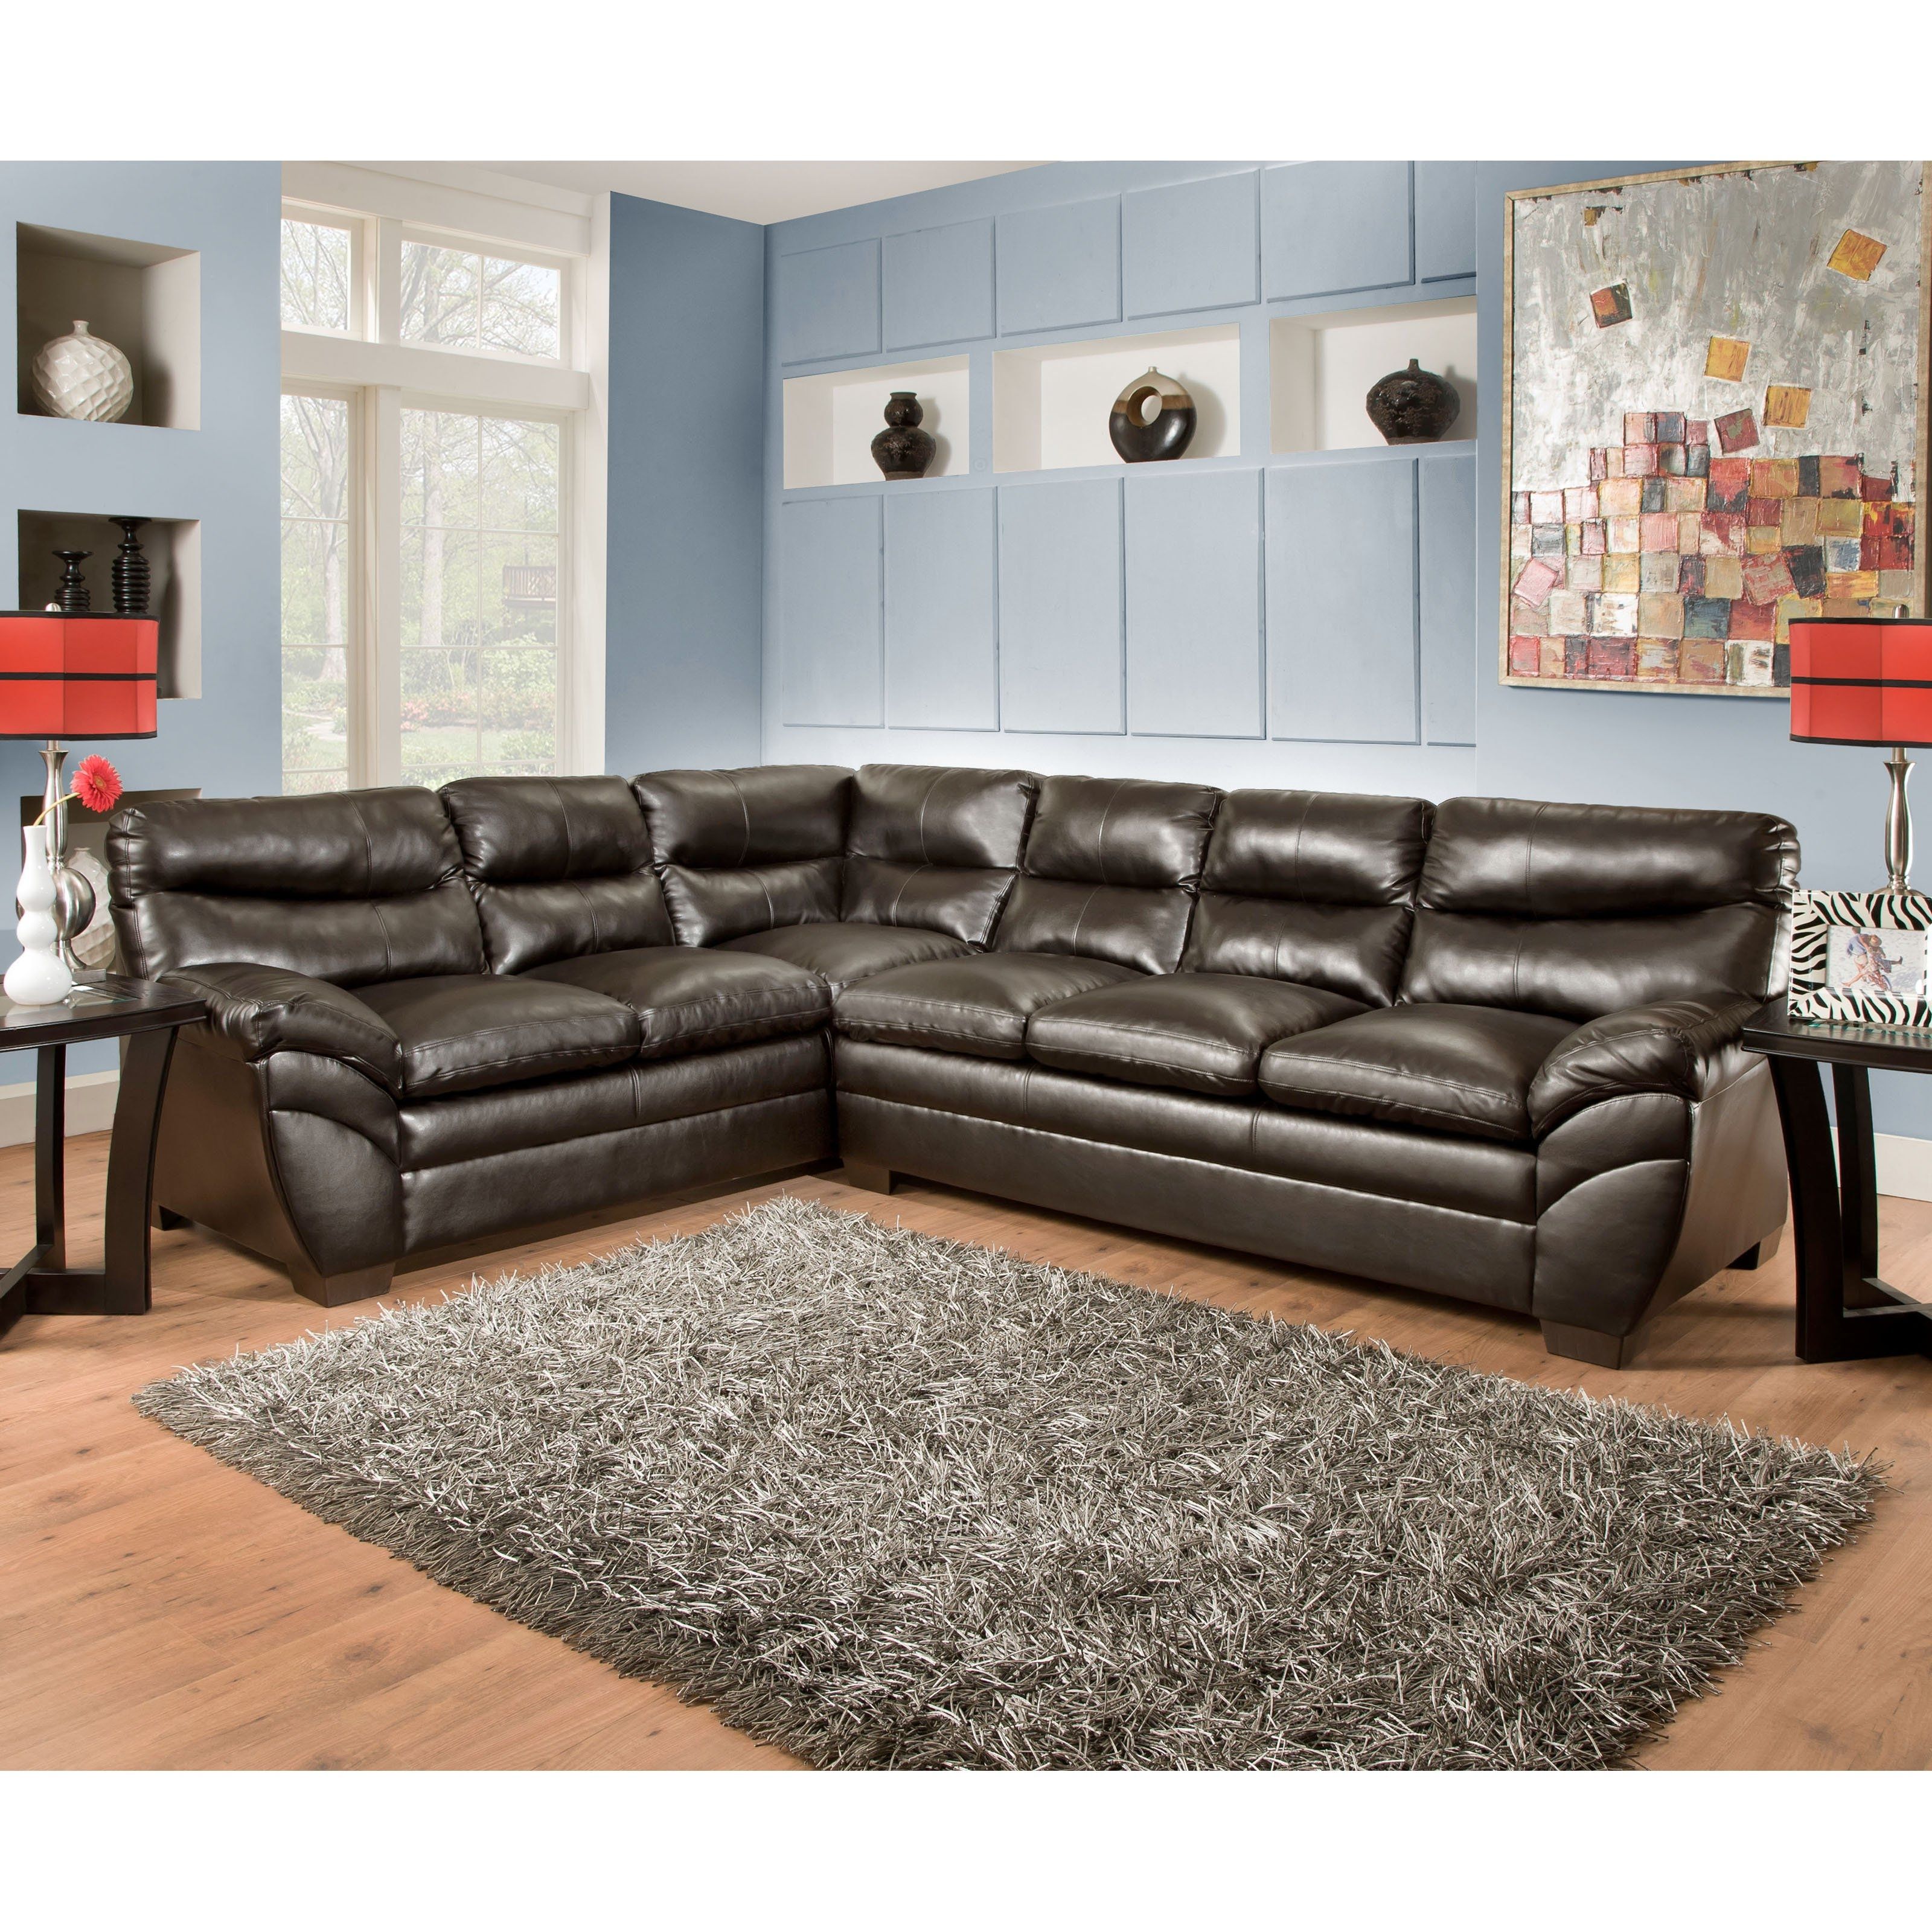 Simmons Soho Bonded Leather Sectional | Hayneedle For Lucy Grey 2 Piece Sectionals With Laf Chaise (View 21 of 30)